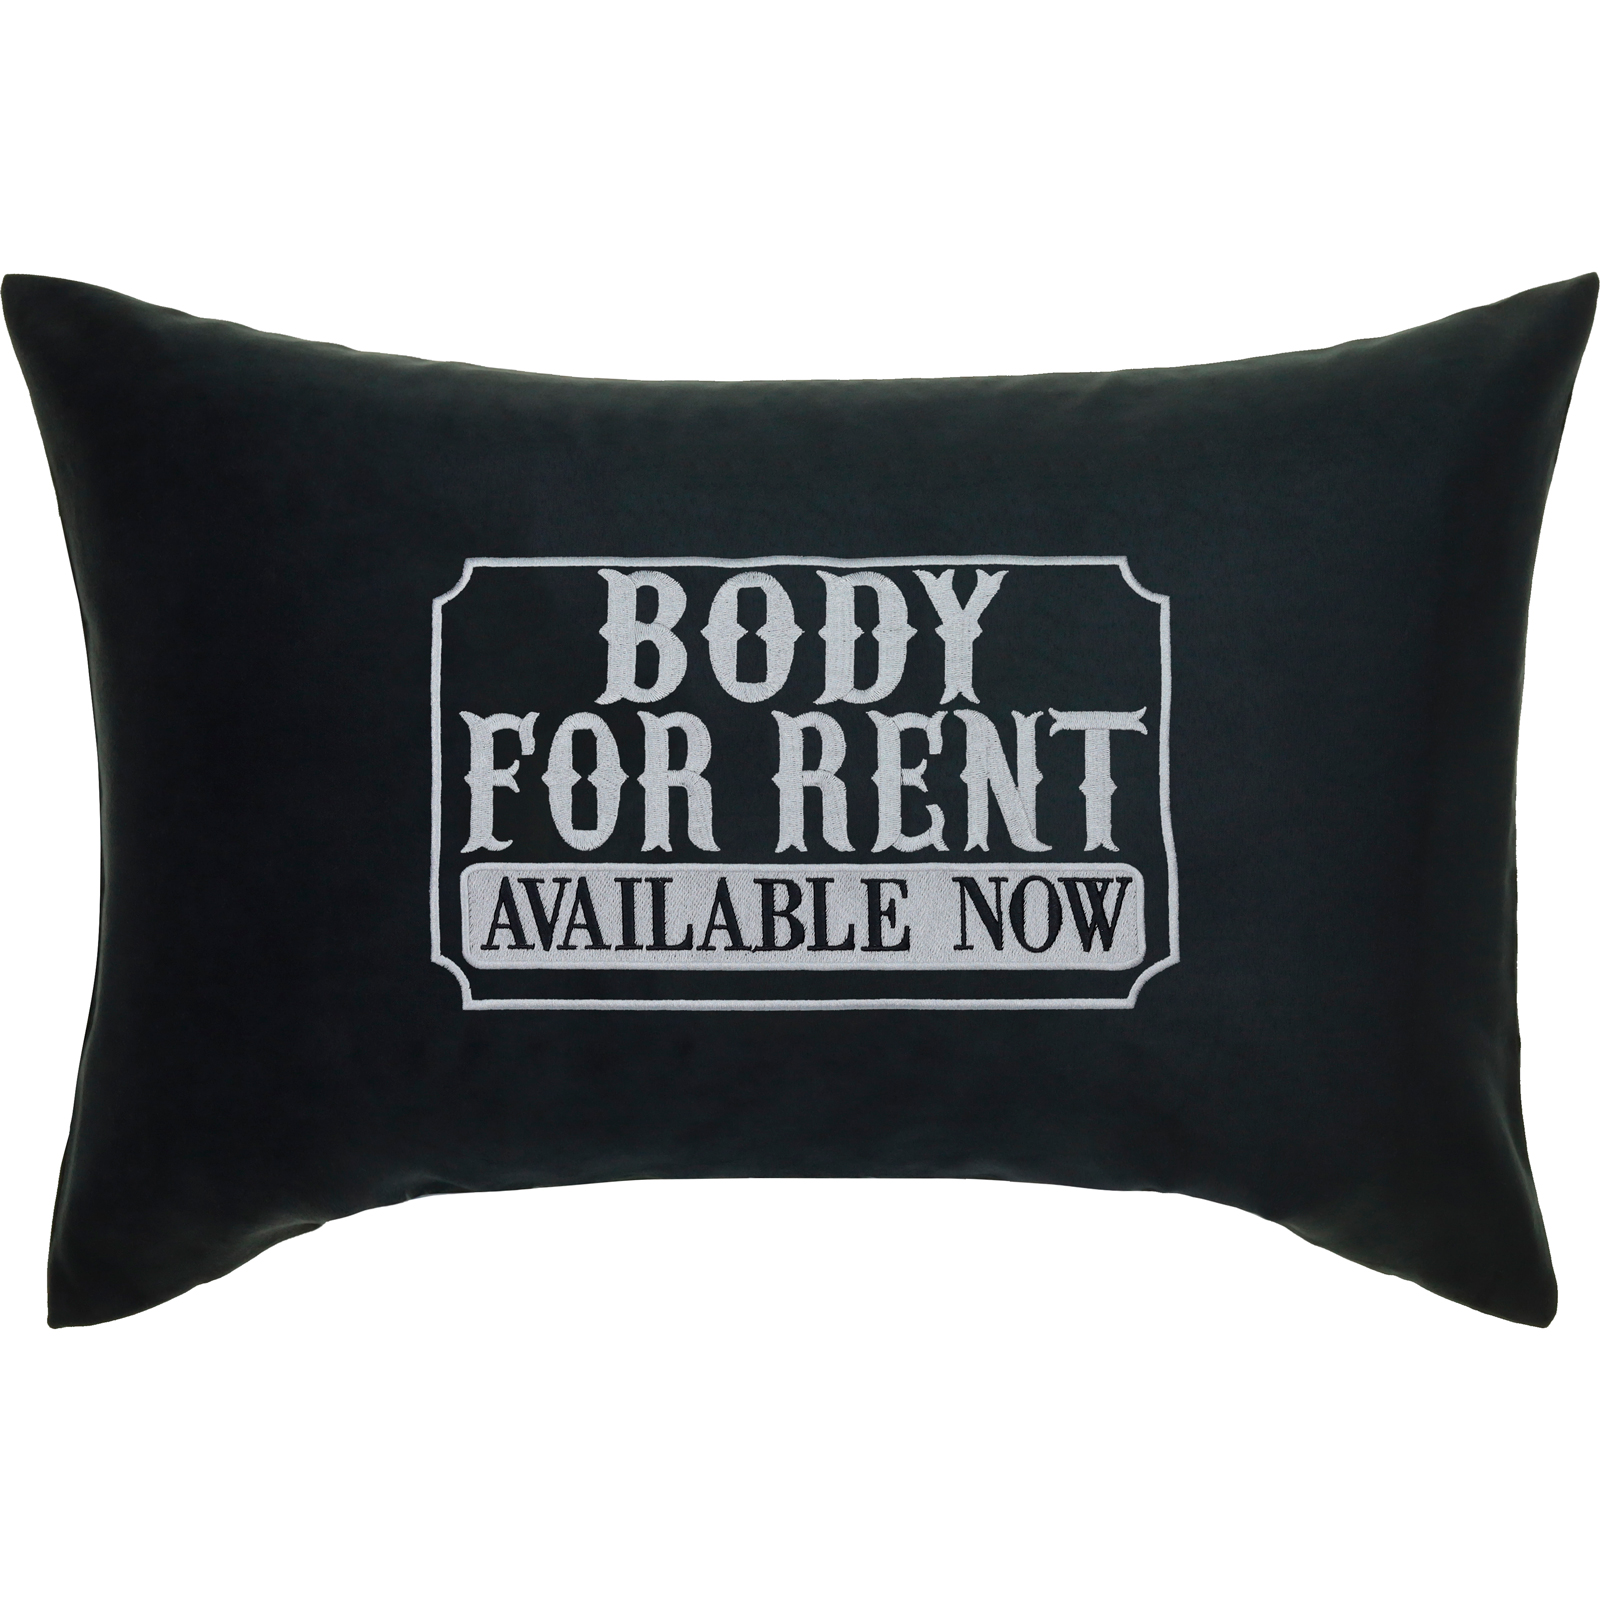 Body for rent - available now - Kissen